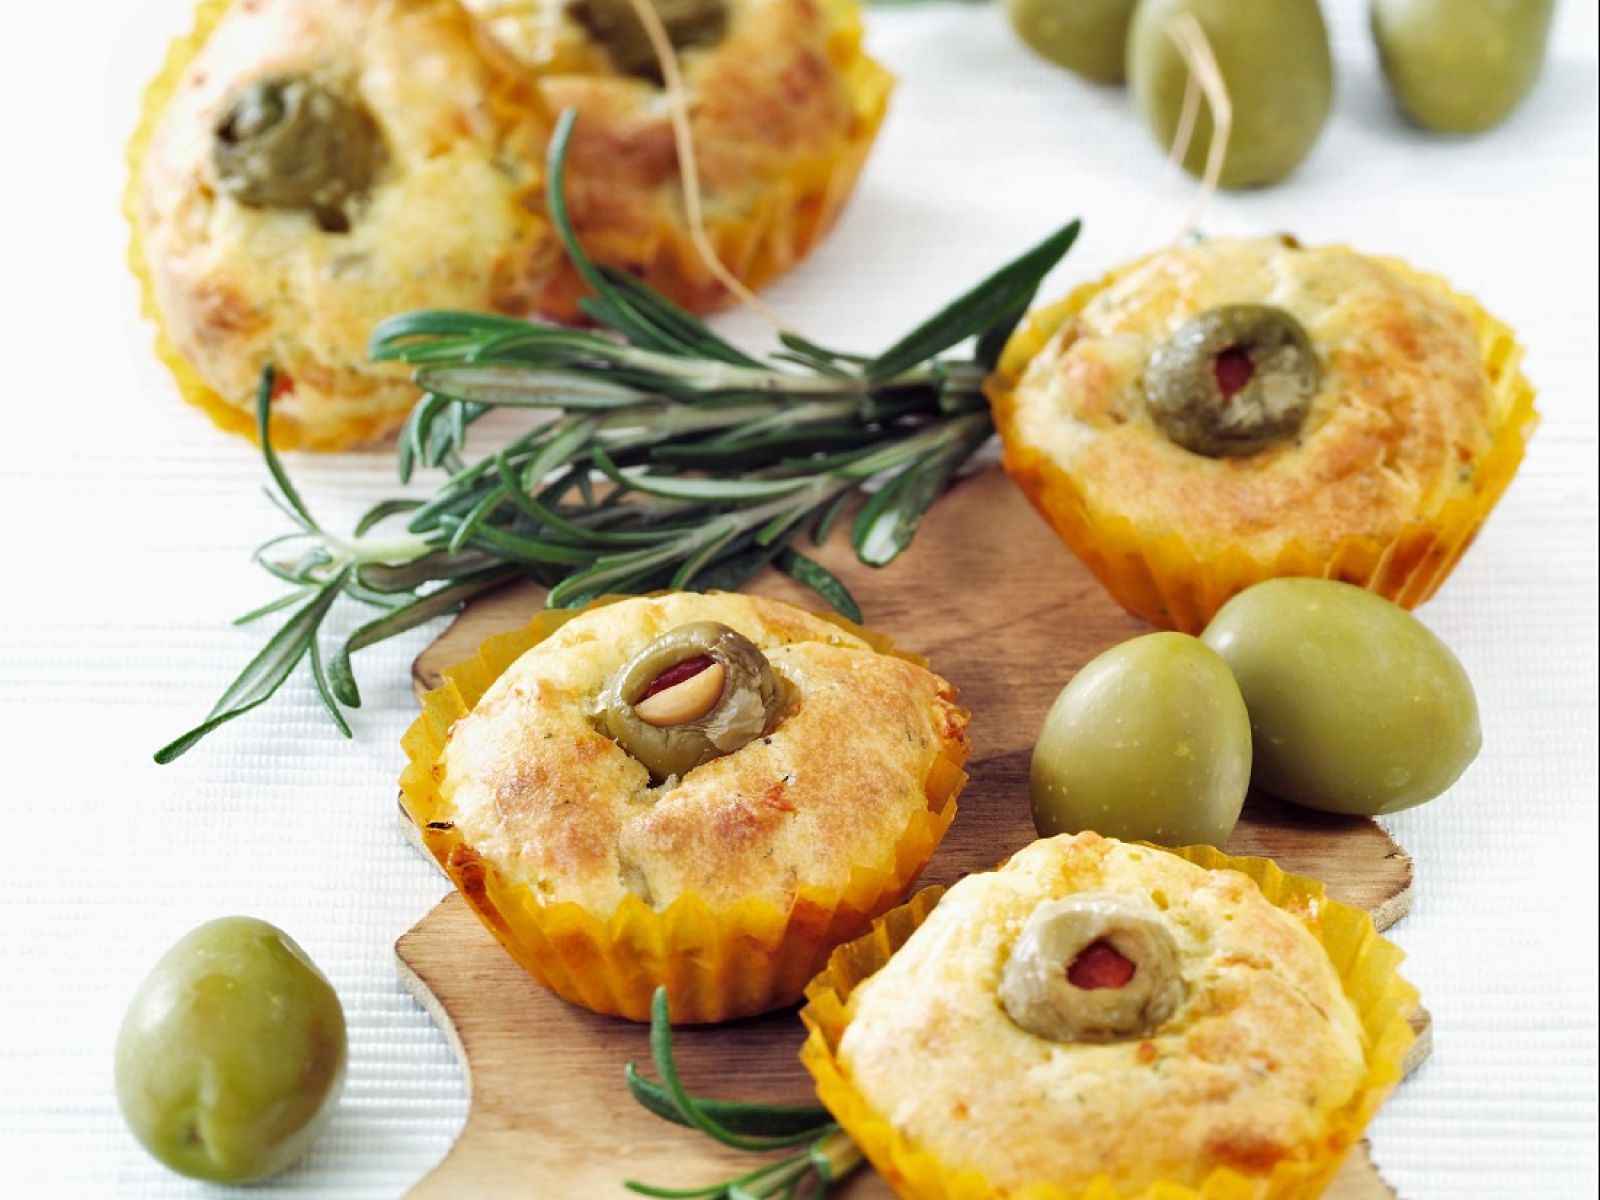 savory-feta-and-rosemary-muffins-with-olives-and-sundried-tomatoes-623276.jpg